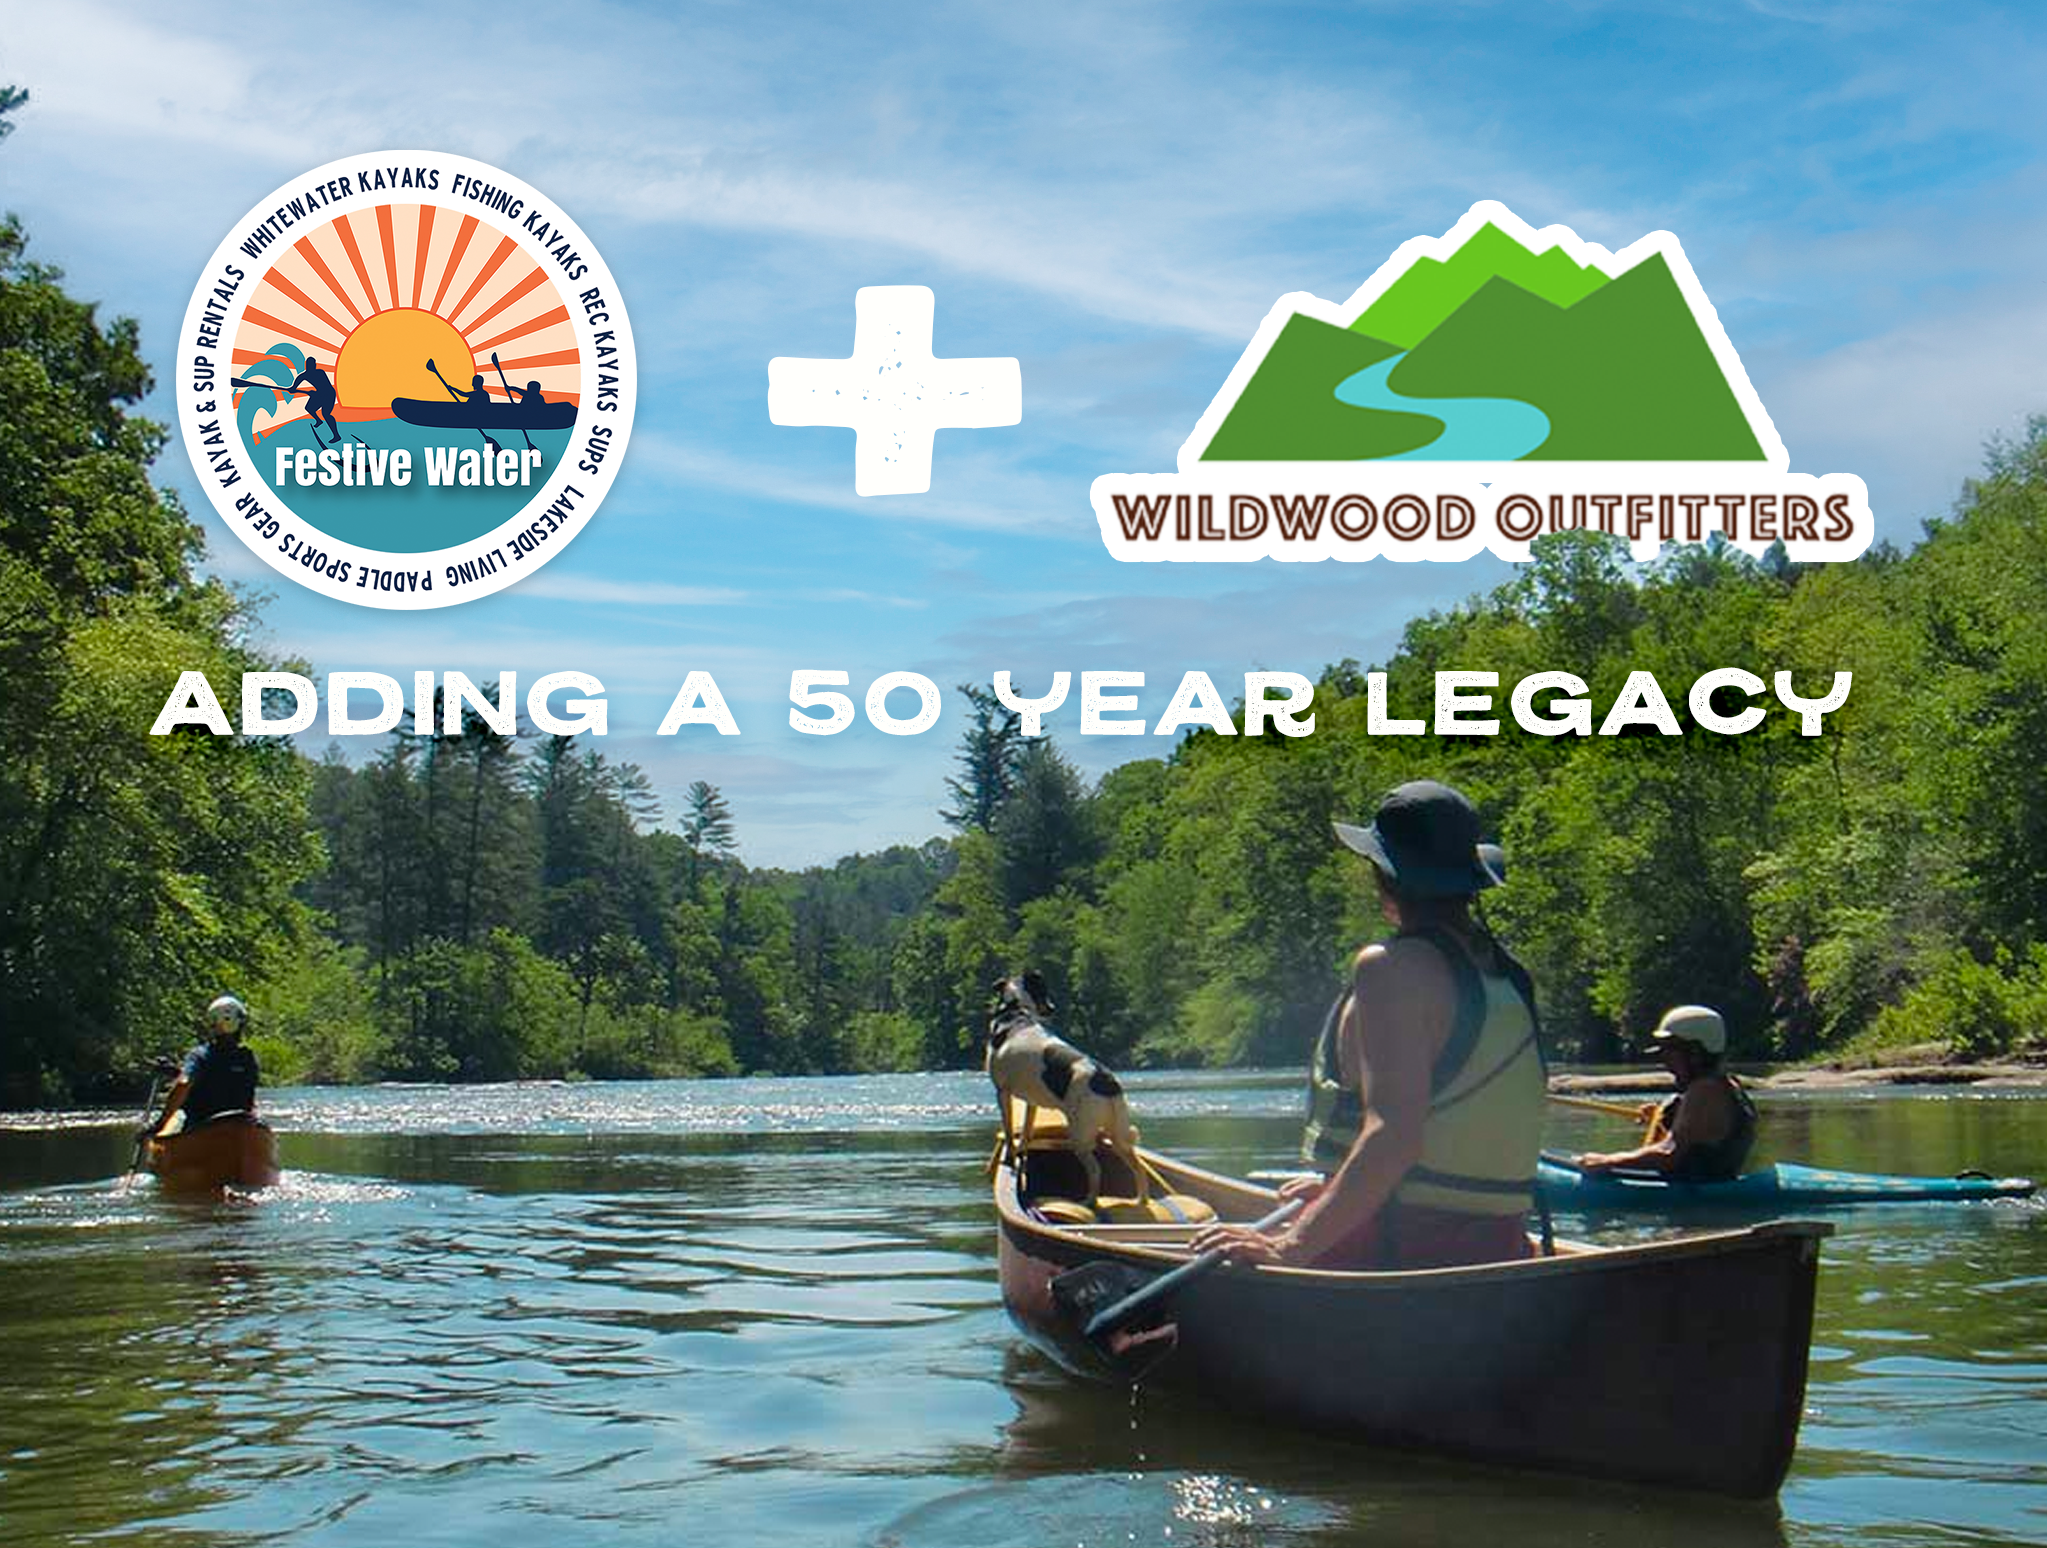 Festive Water Paddlesports is acquiring Wildwood Outfitters